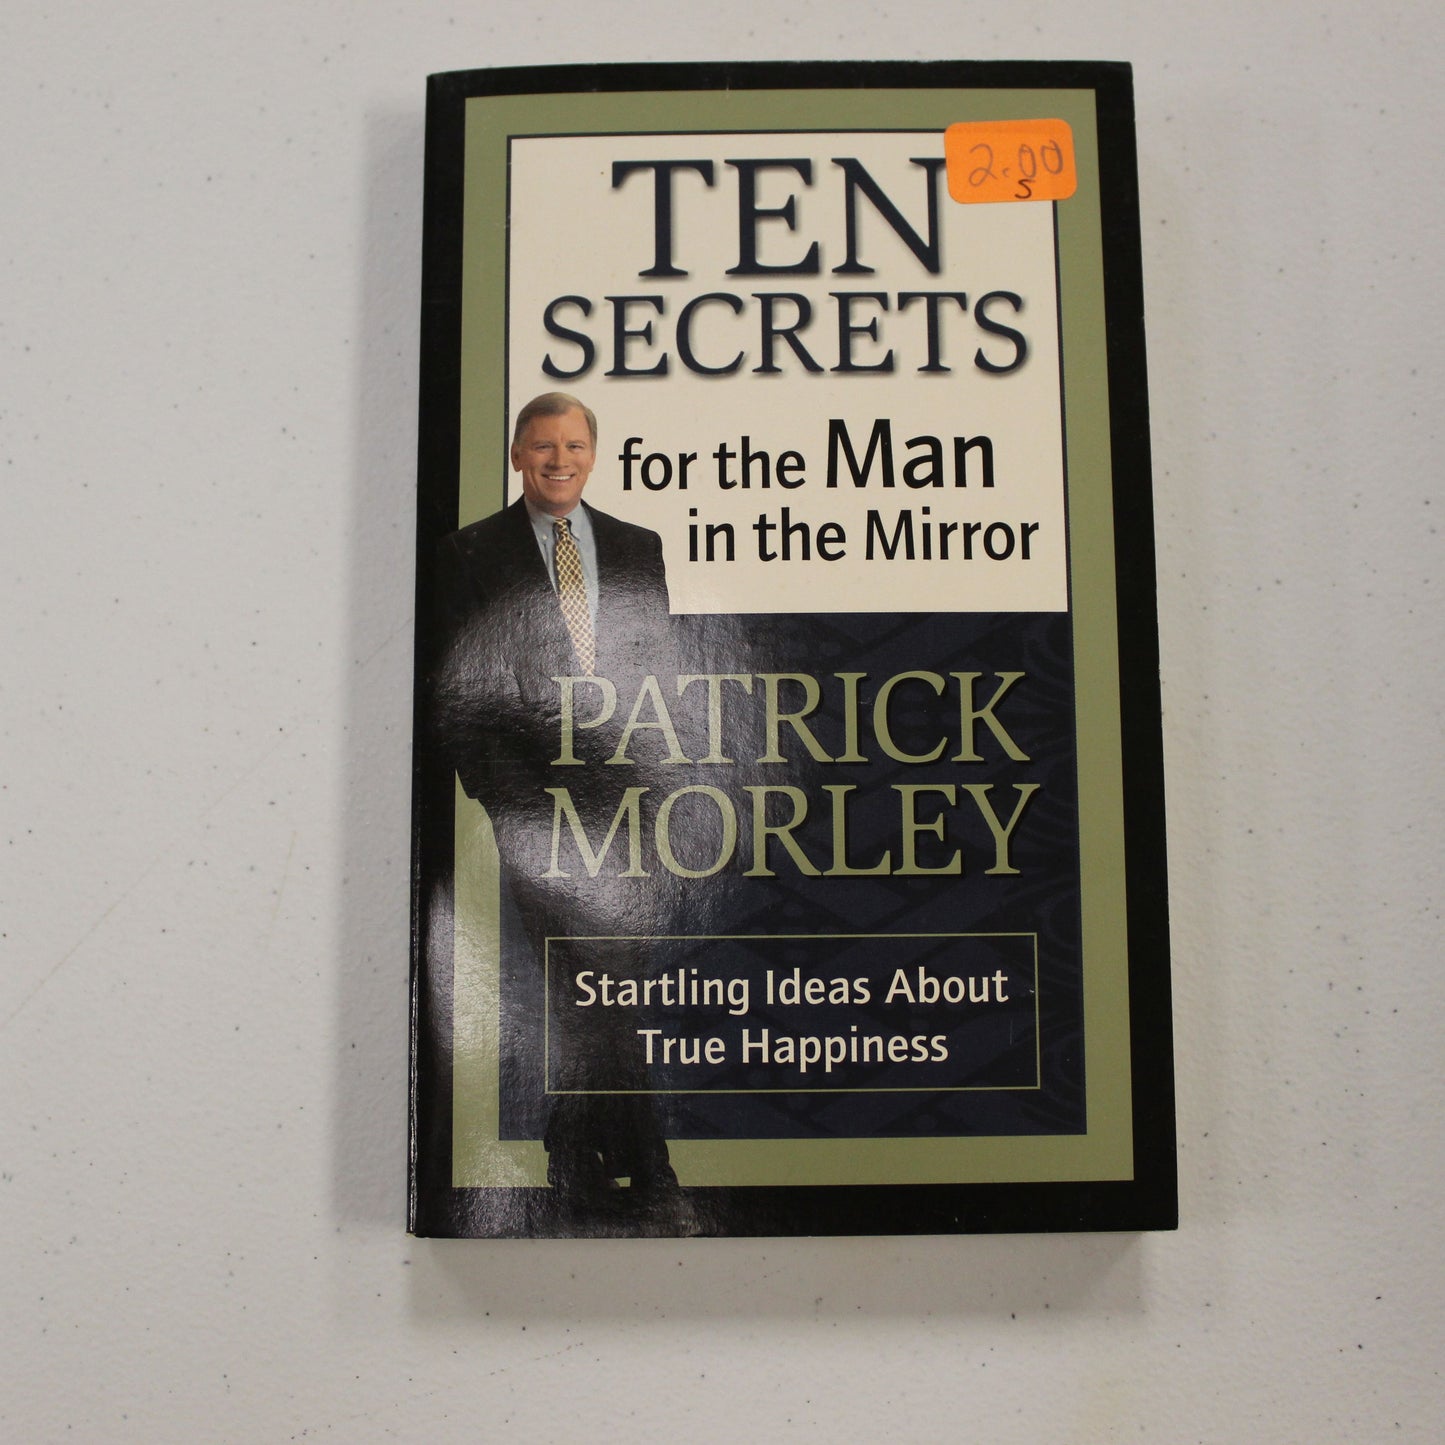 TEN SECRETS FOR THE MAN IN THE MIRROR